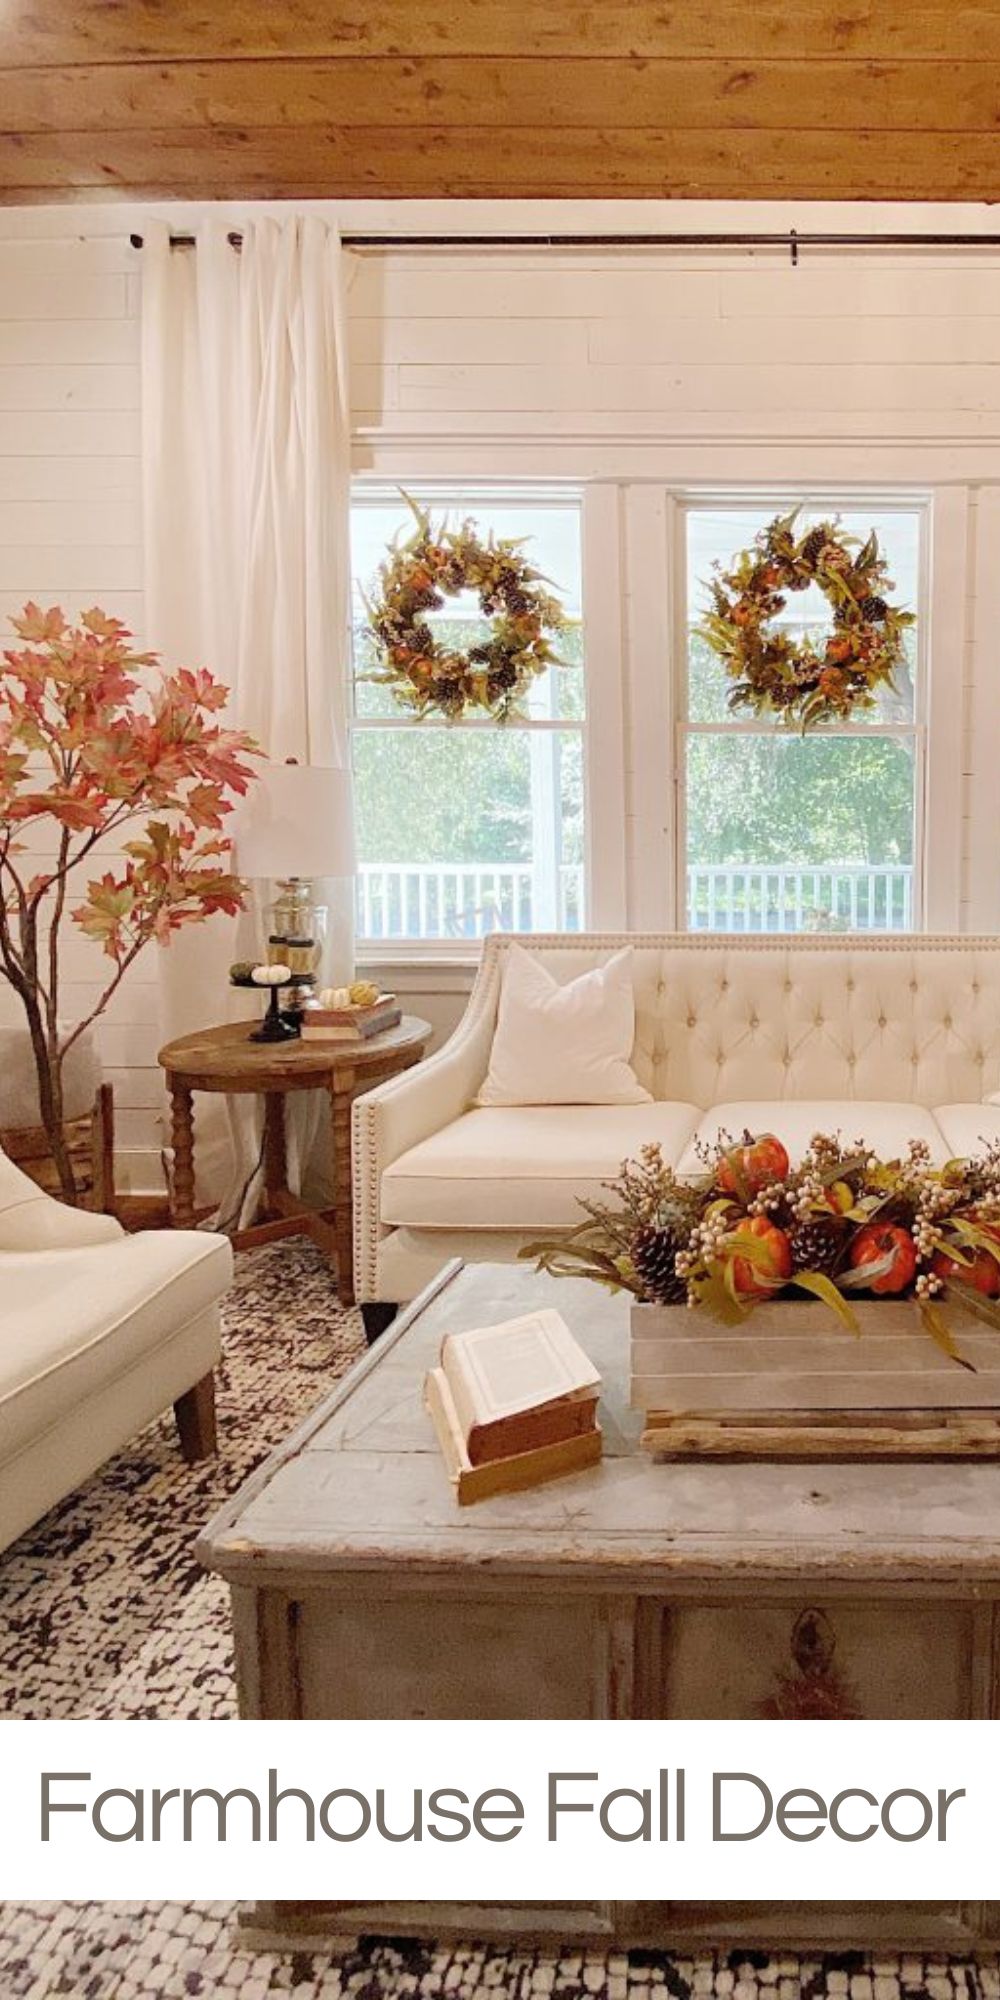 I wanted to share more fall decor so why not start with some farmhouse decor in our Waco living room? The fall decor brightens up our home!